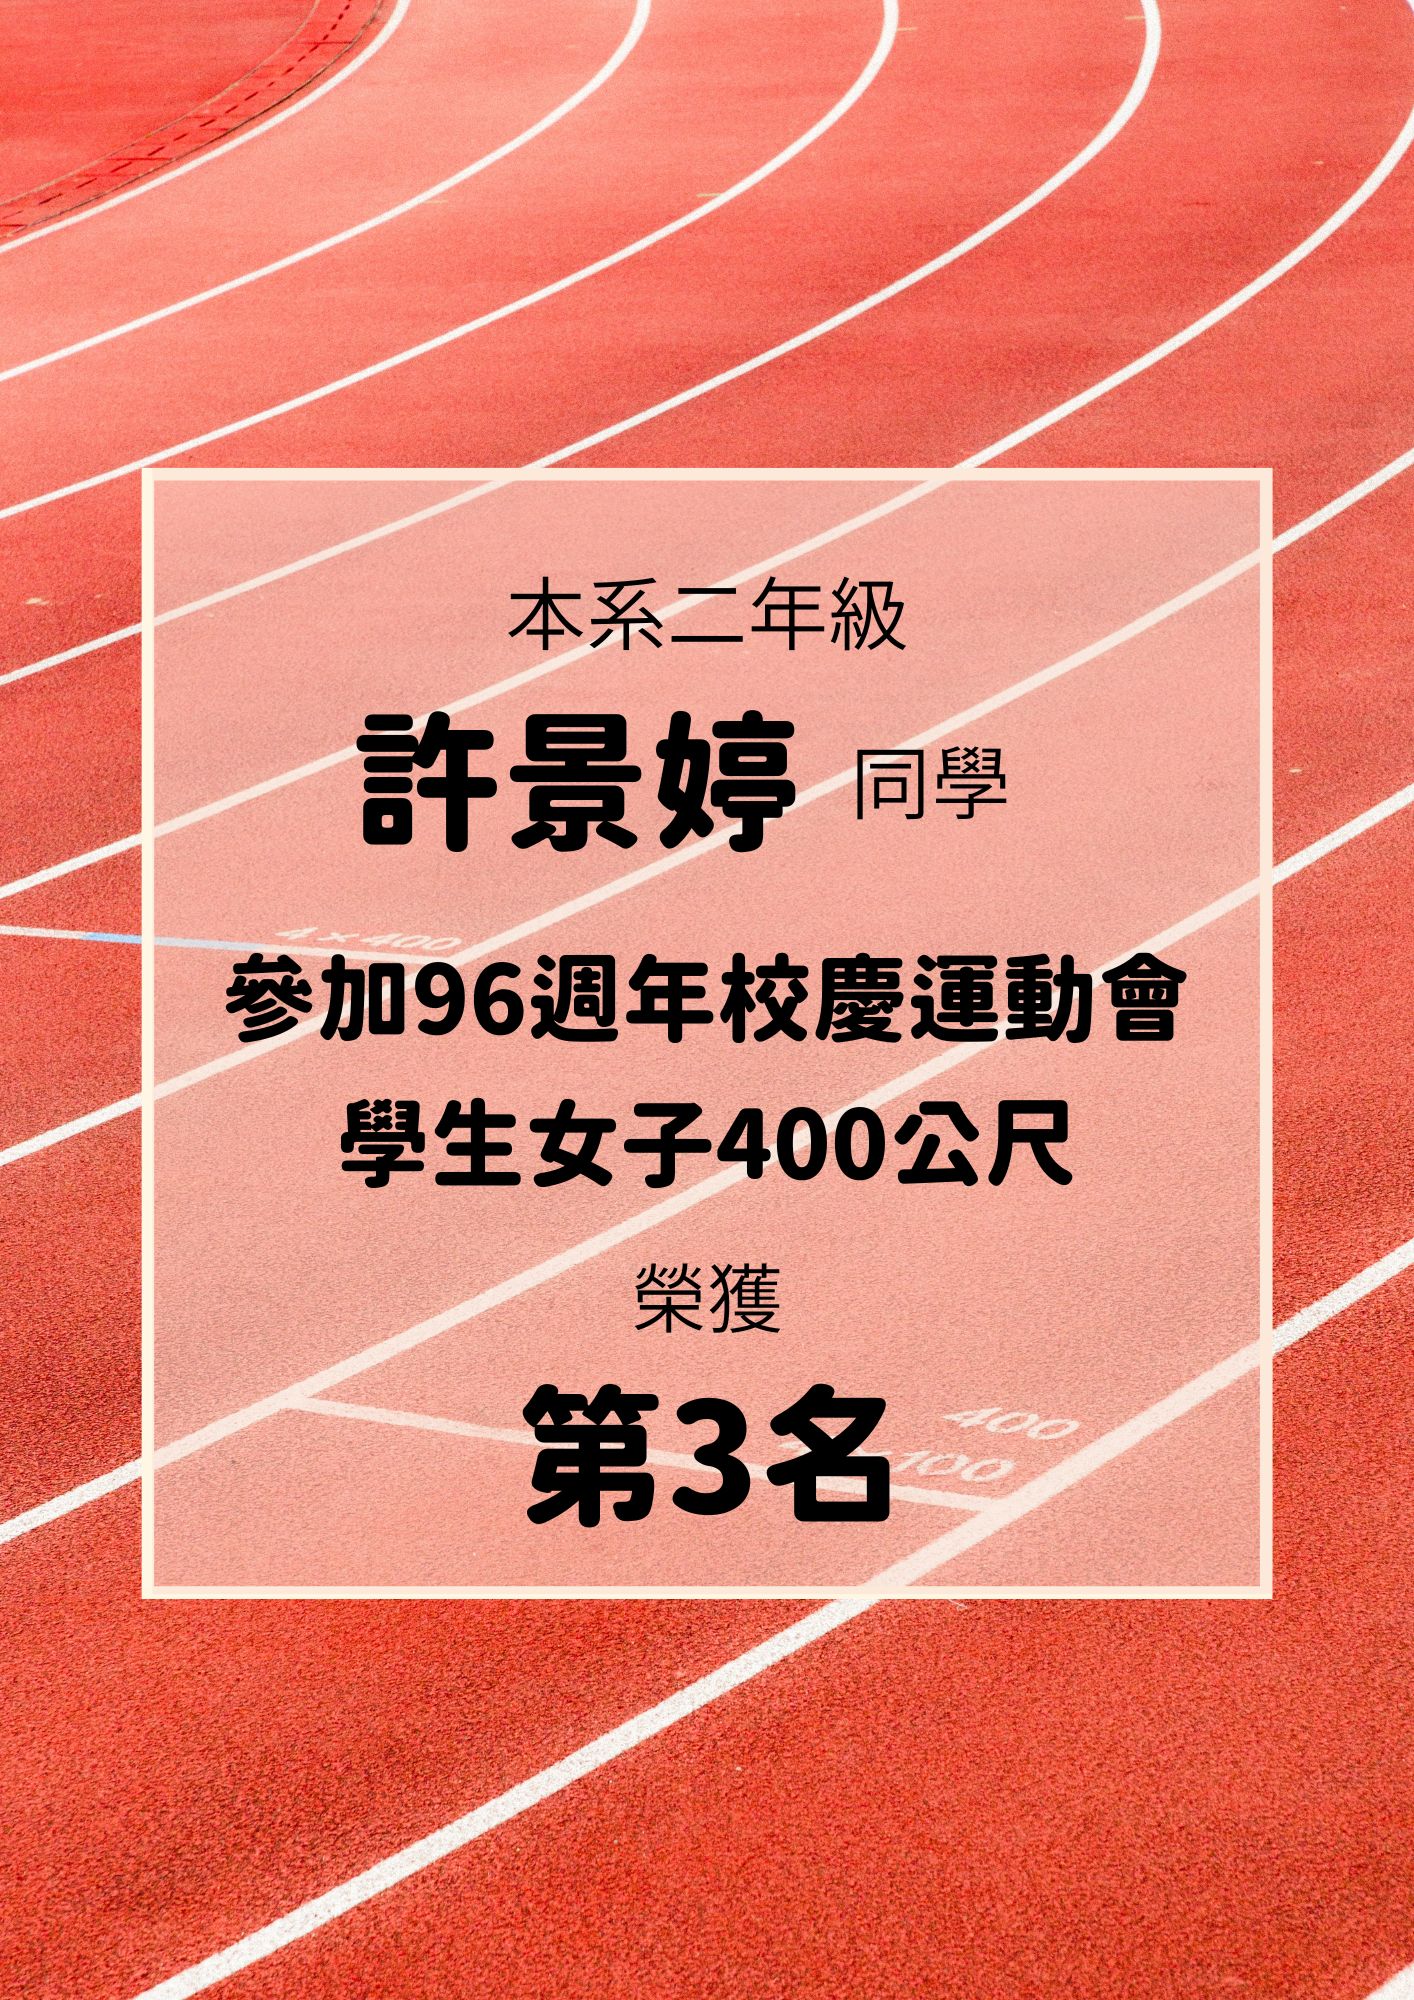 【Congratulations】Outstanding Sports Performance by Students in Our Departmen